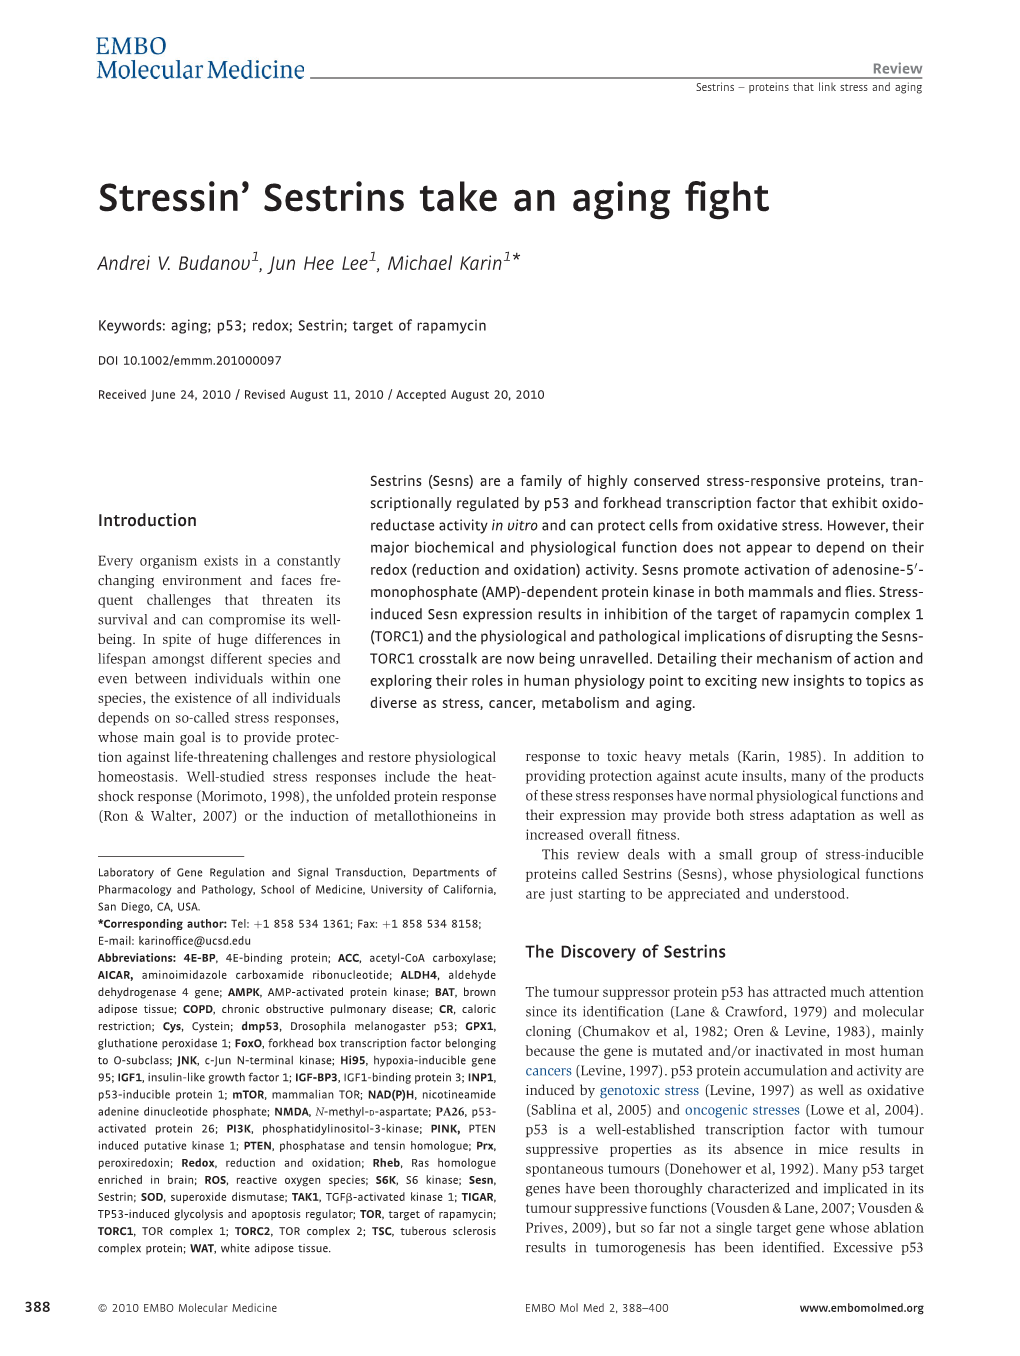 Stressin' Sestrins Take an Aging Fight